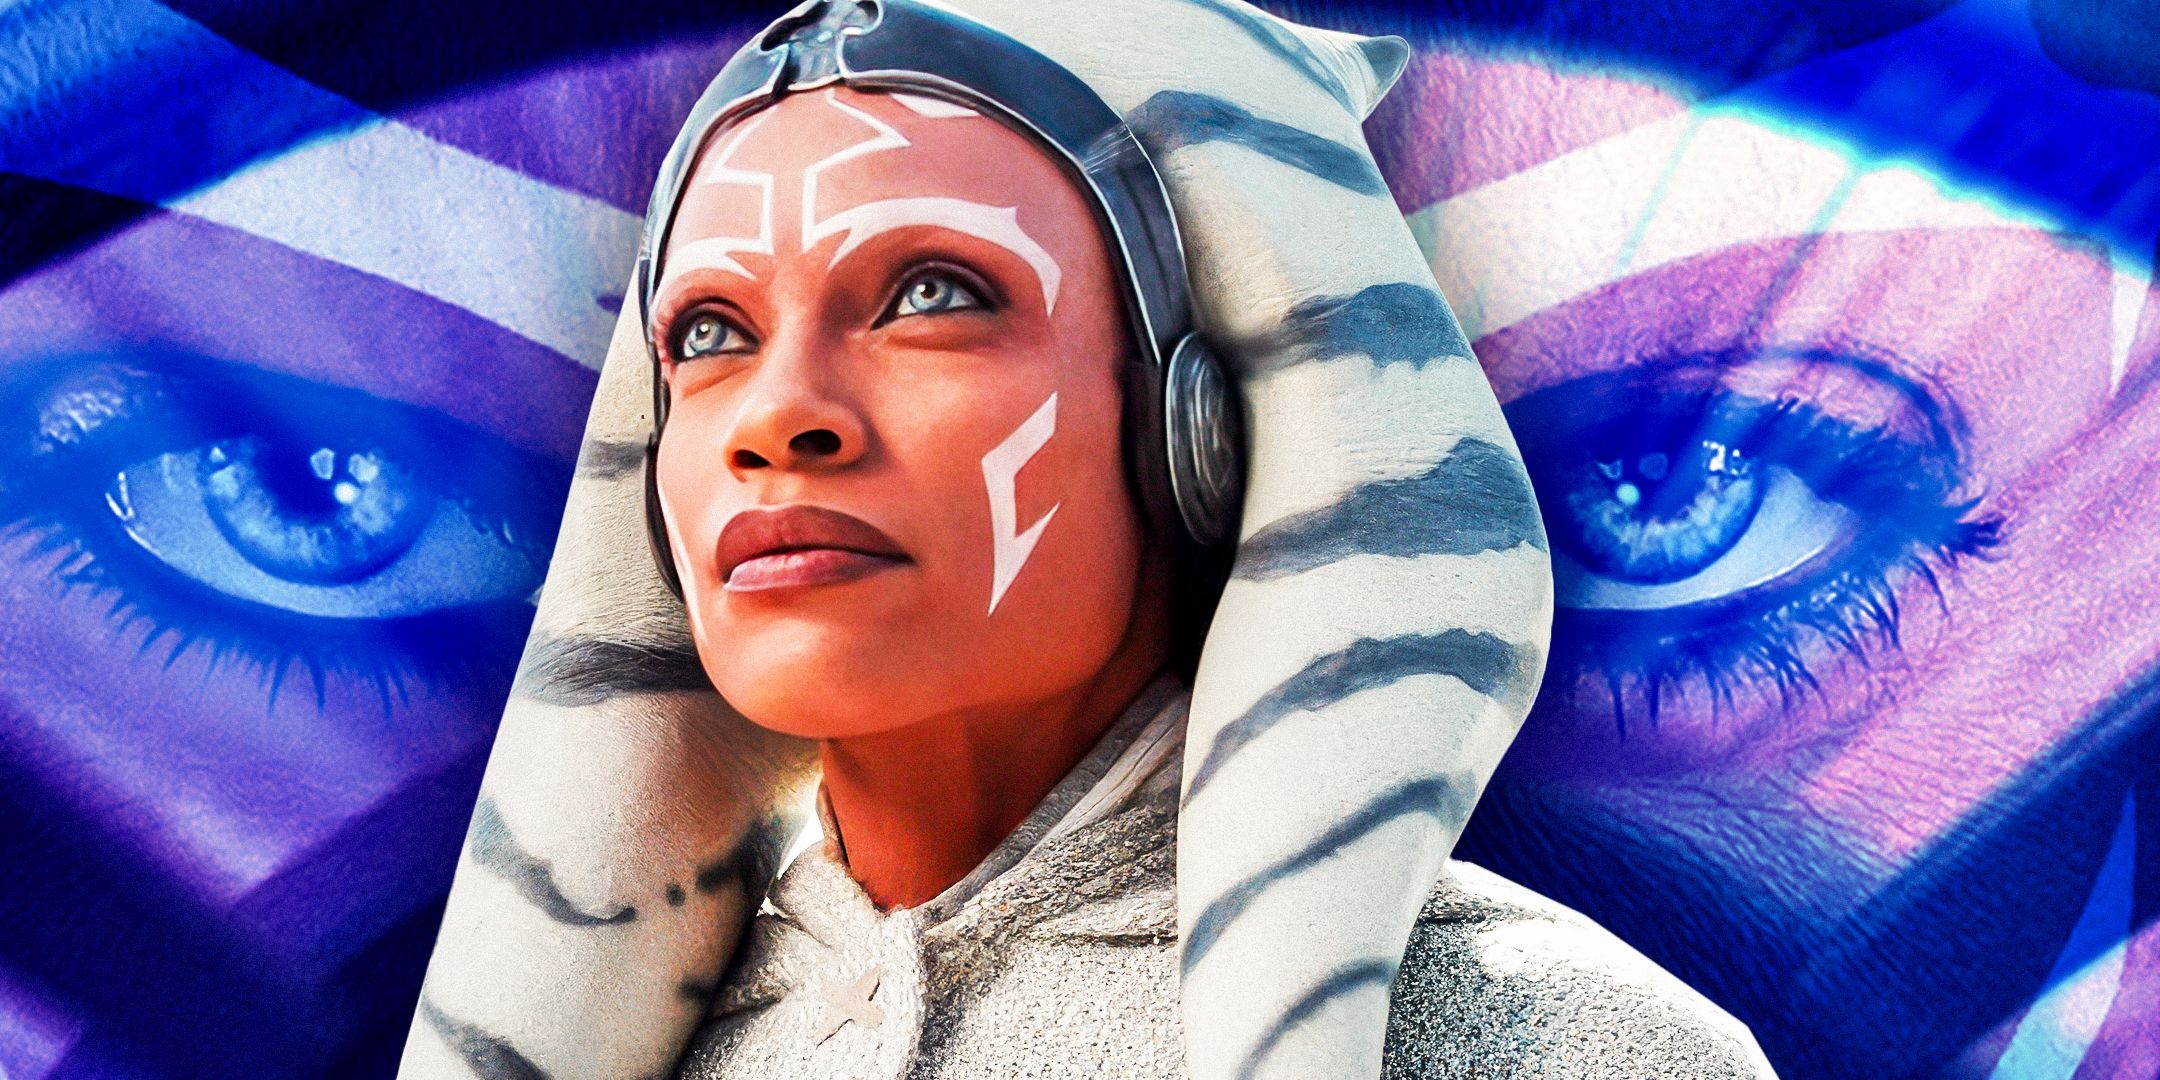 Ahsoka Tano as a Jedi Master in the foreground looking up with a close up of Ahsoka's eyes in the background